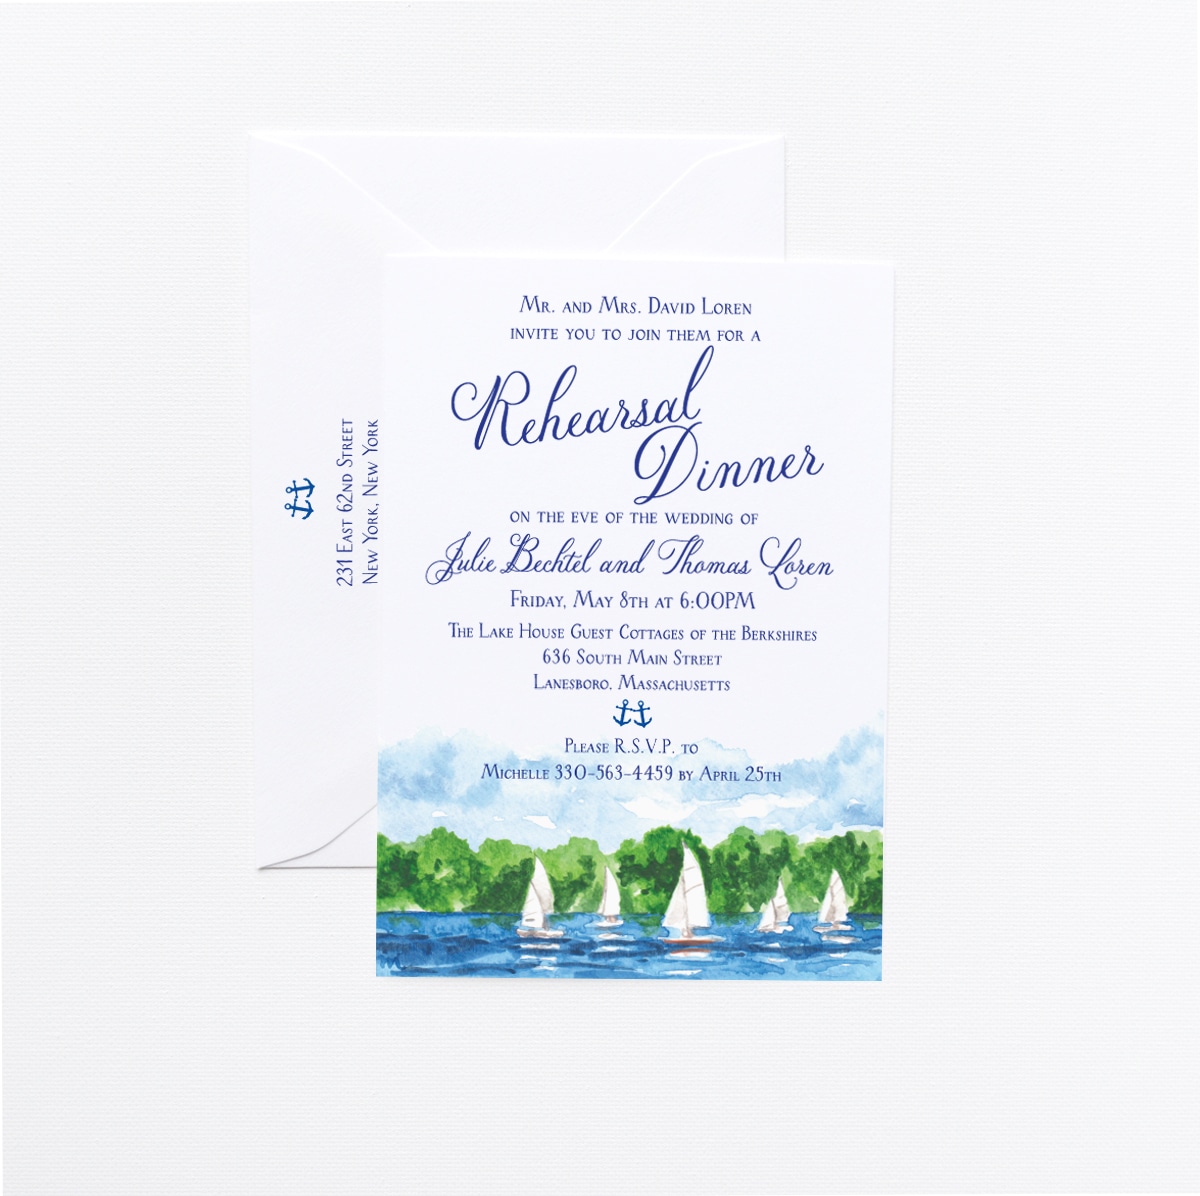 27 Sea-worthy Nautical Wedding Invitations. Watercolor lake and sailboat landscape rehearsal dinner invitations by artist Michelle Mospens. | Mospens Studio